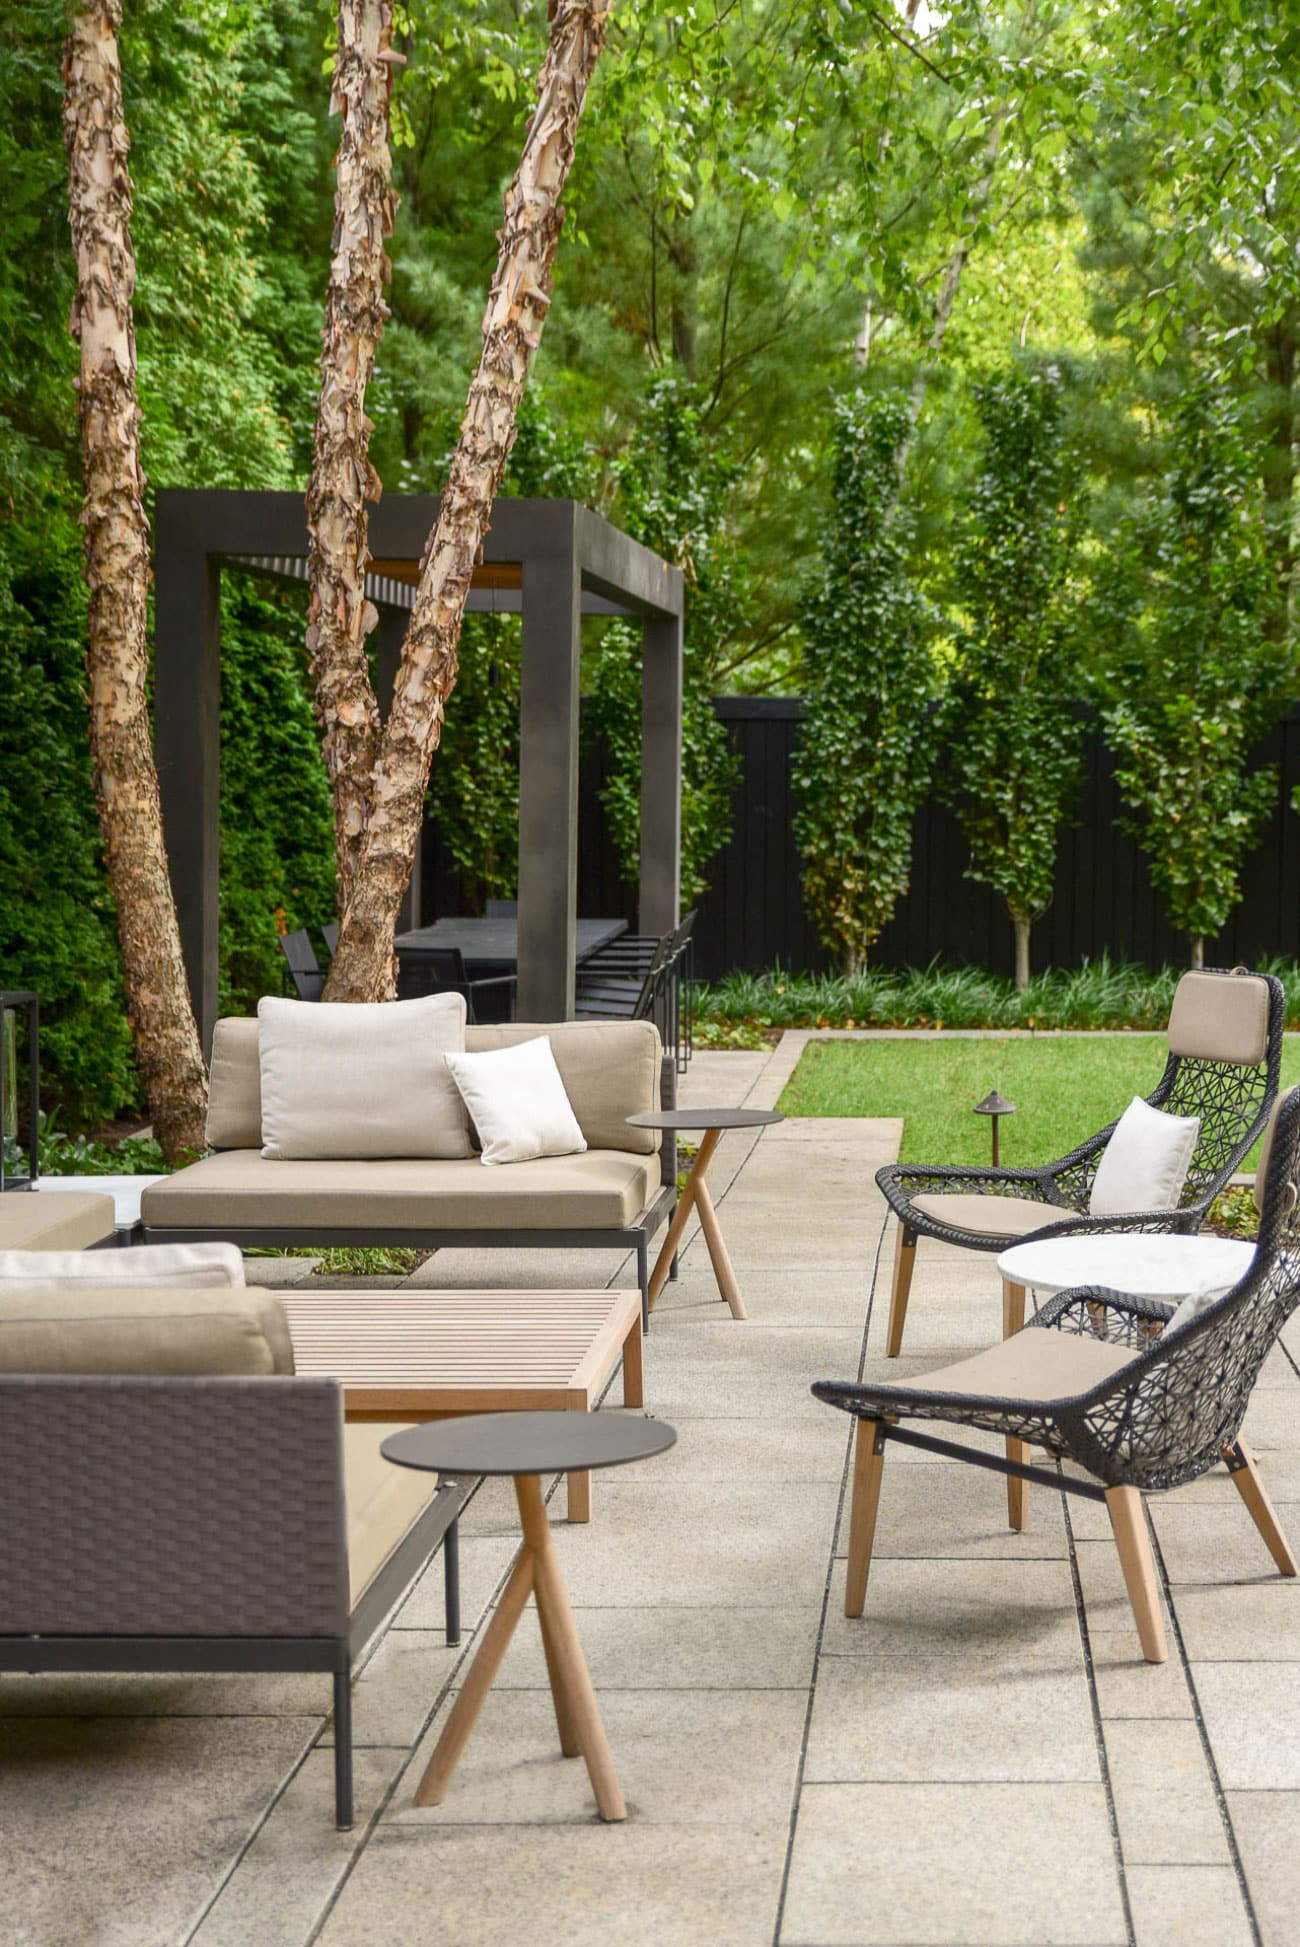 Designers of the Best Contemporary Outdoor Furniture Think Outside the Box